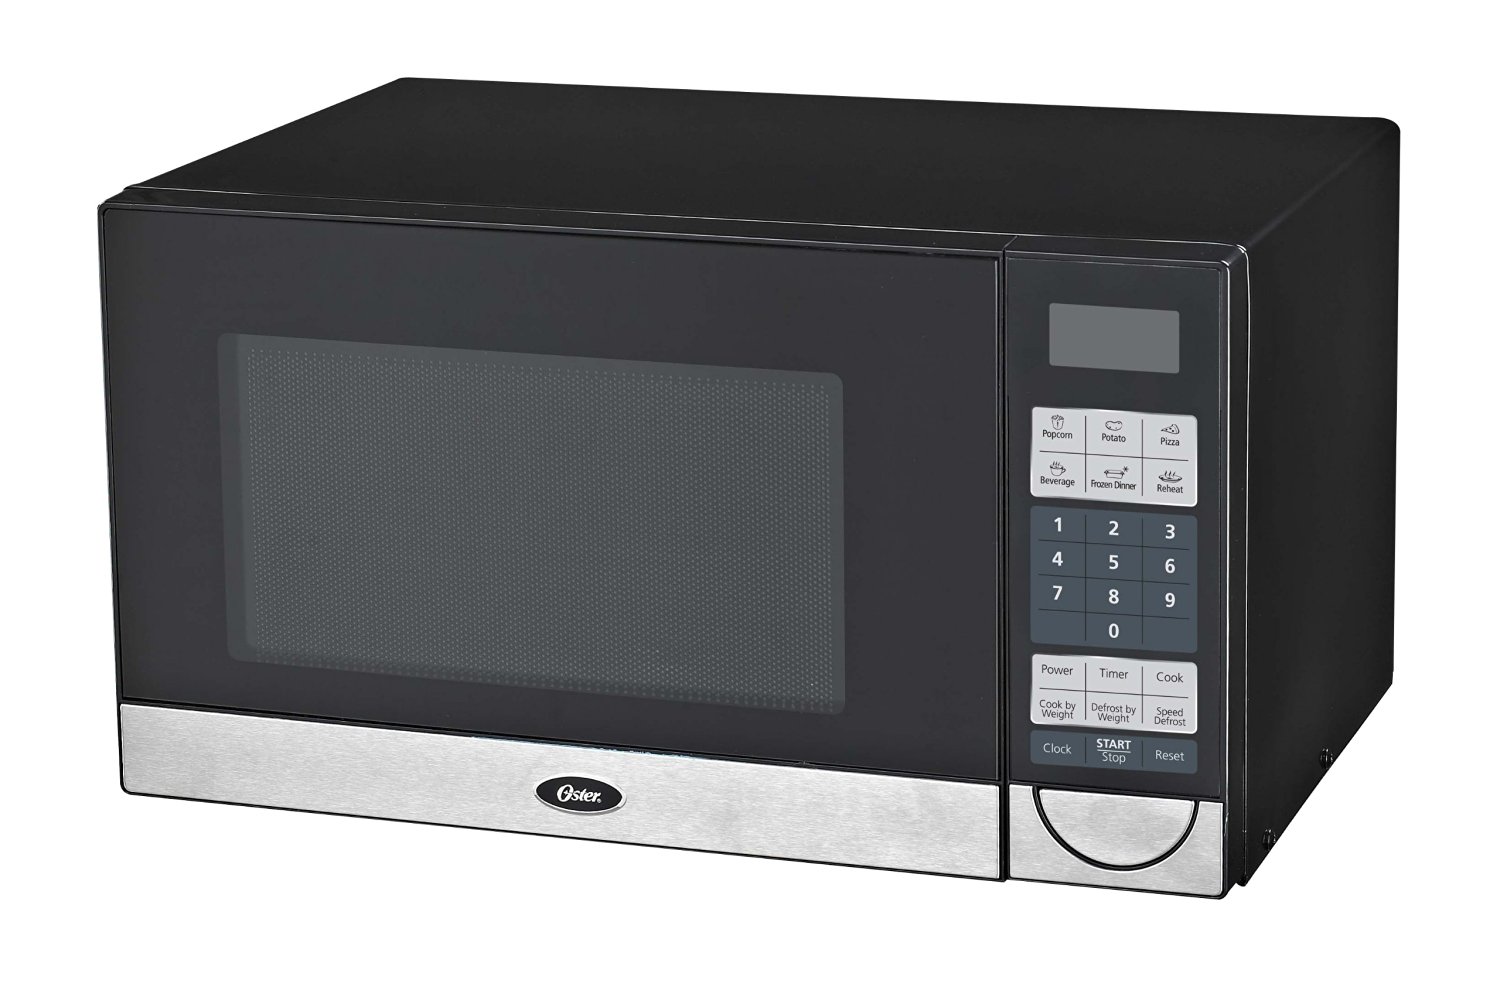 Oster OGB5902 0.9-Cubic Feet Microwave Oven, Black